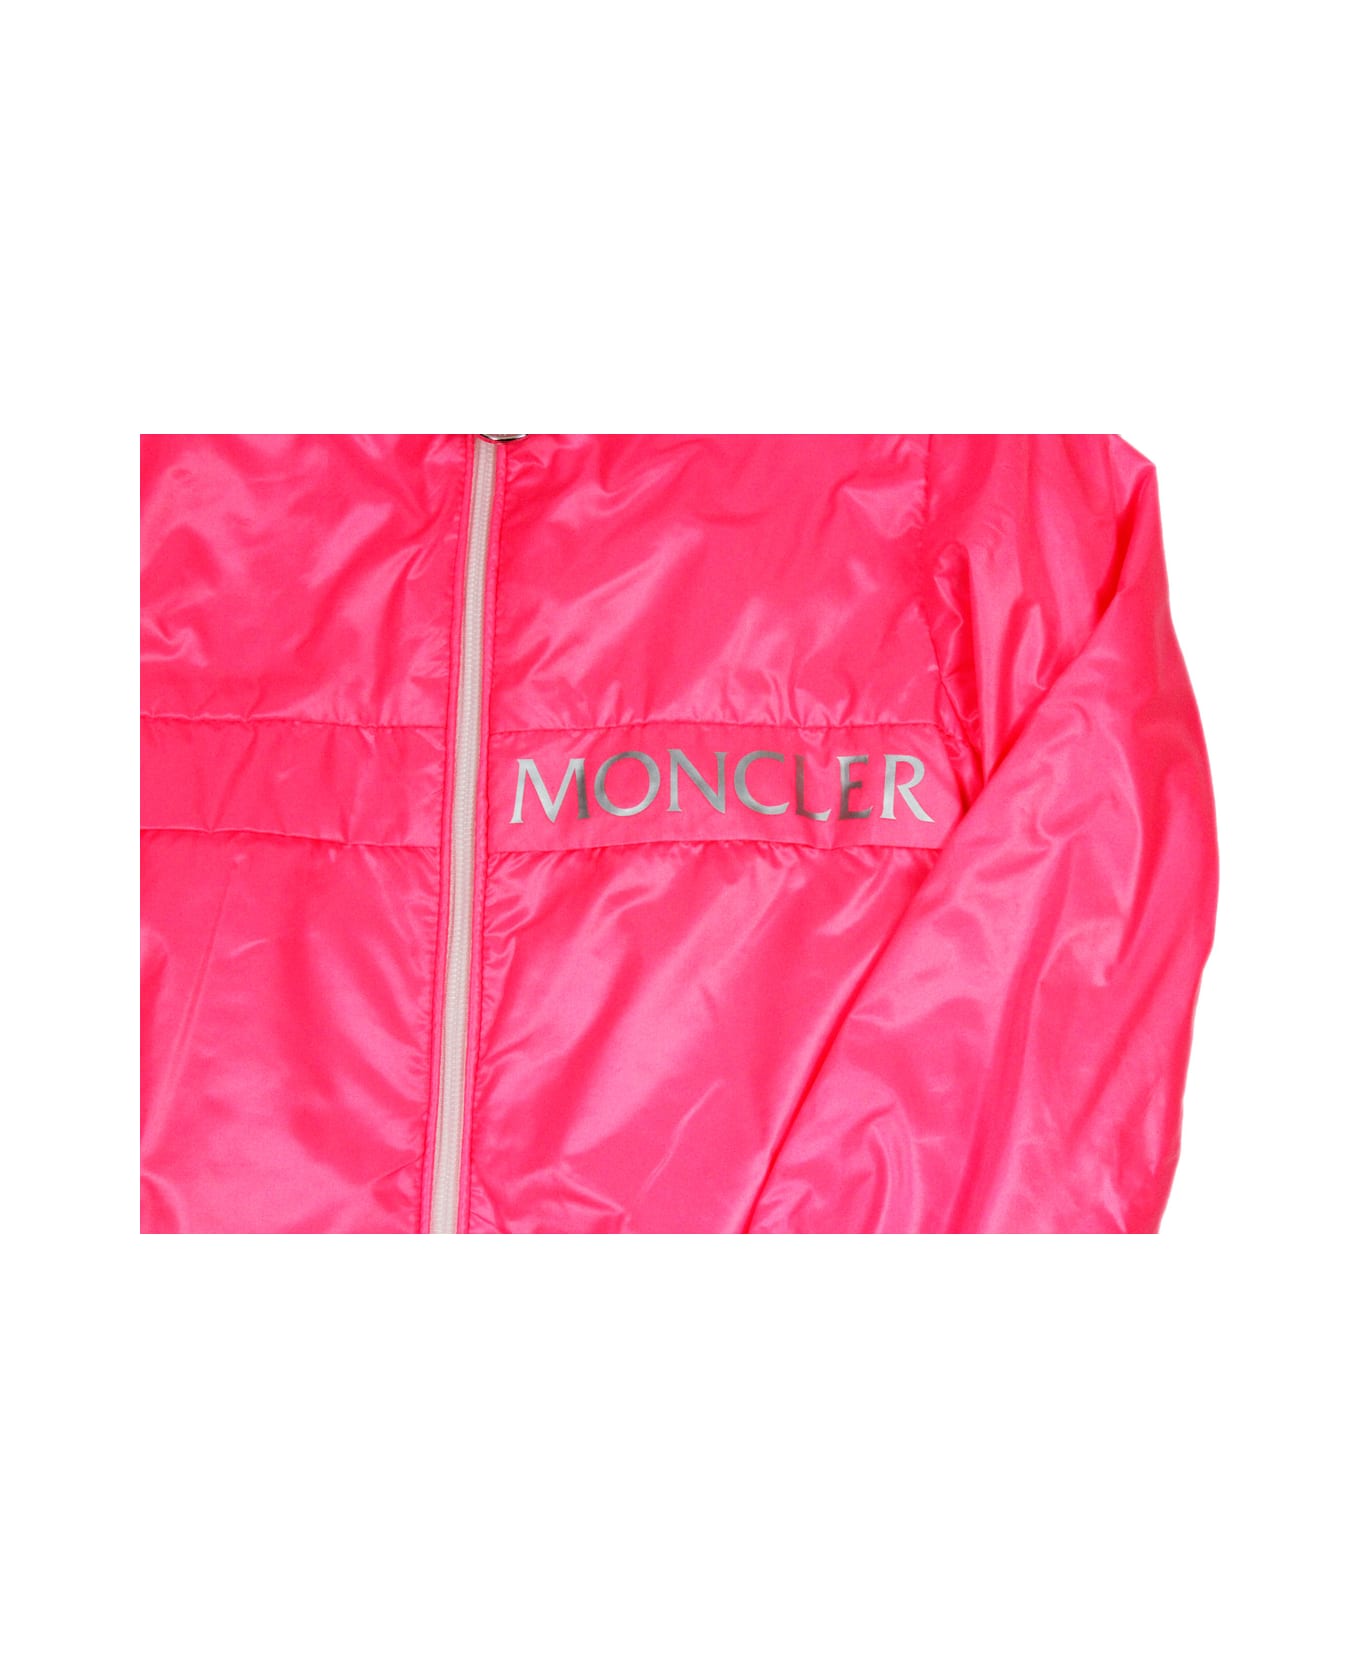 Moncler Admeta Windproof Jacket With Hood And Zip In Nylon And Cotton Inside And With Writing On The Front - Fucsia